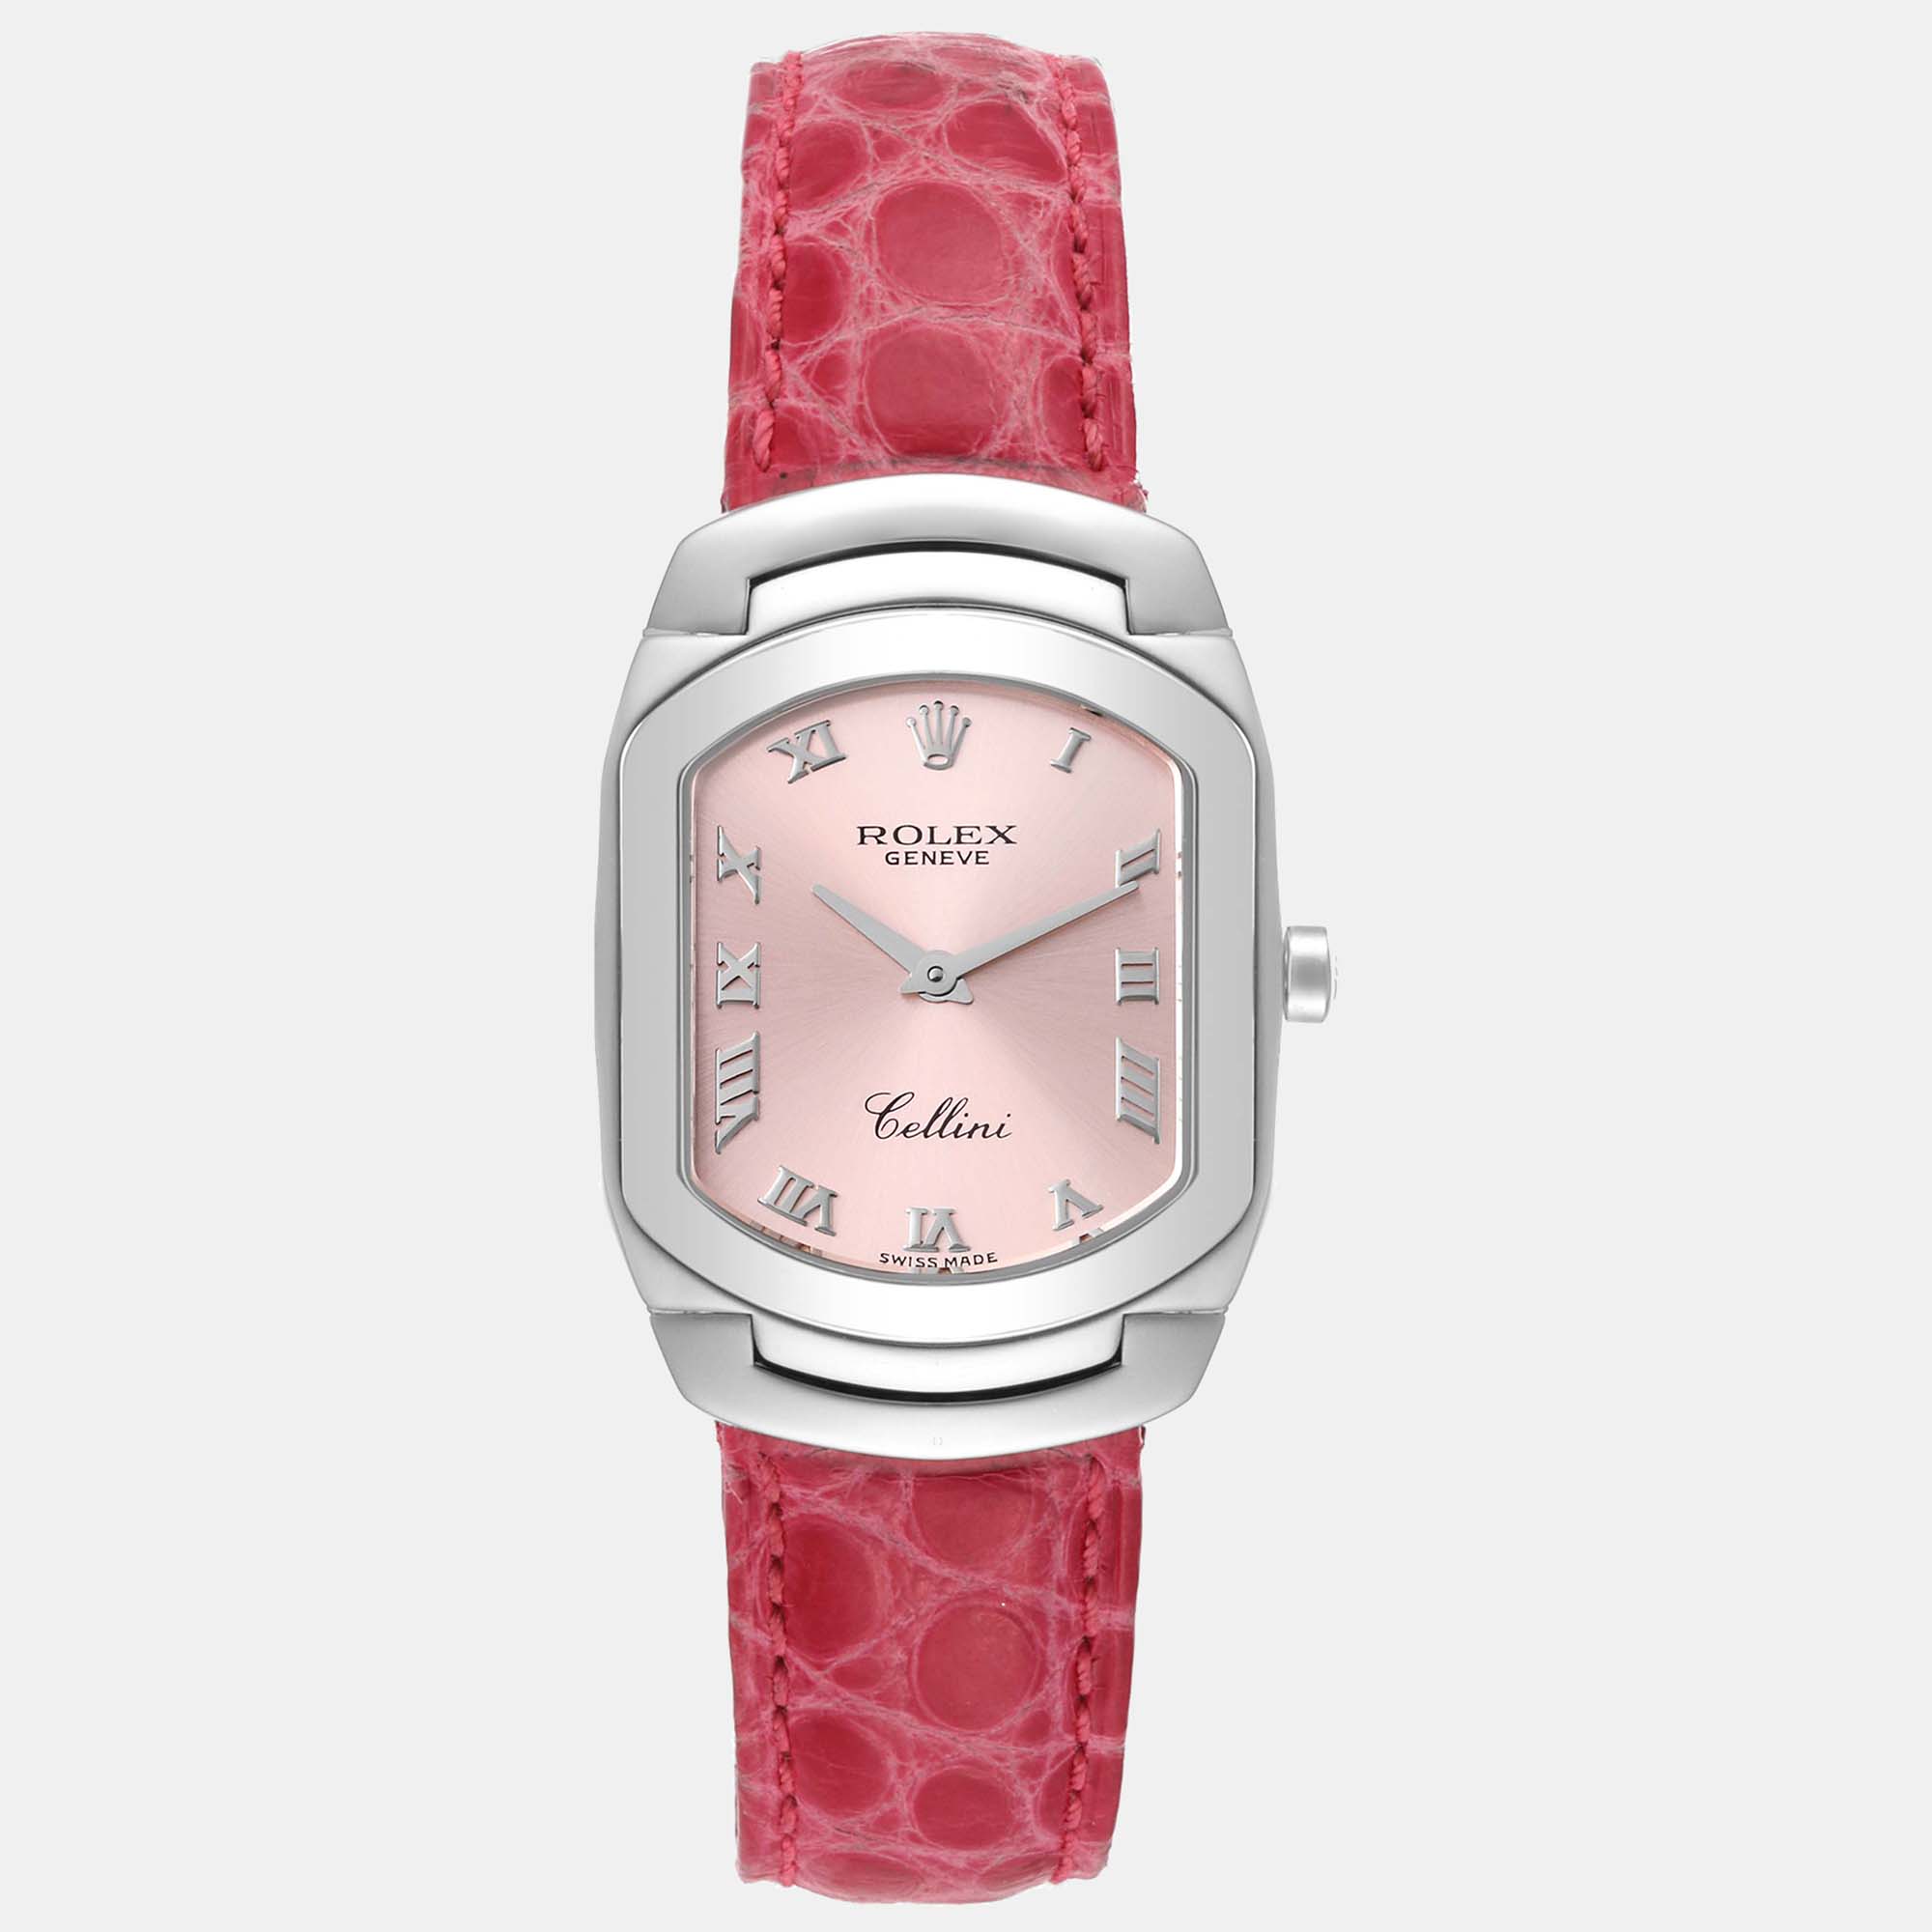 Pre-owned Rolex Cellini Cellissima White Gold Pink Dial Ladies Watch 6631 24.0 Mm X 35.0 Mm